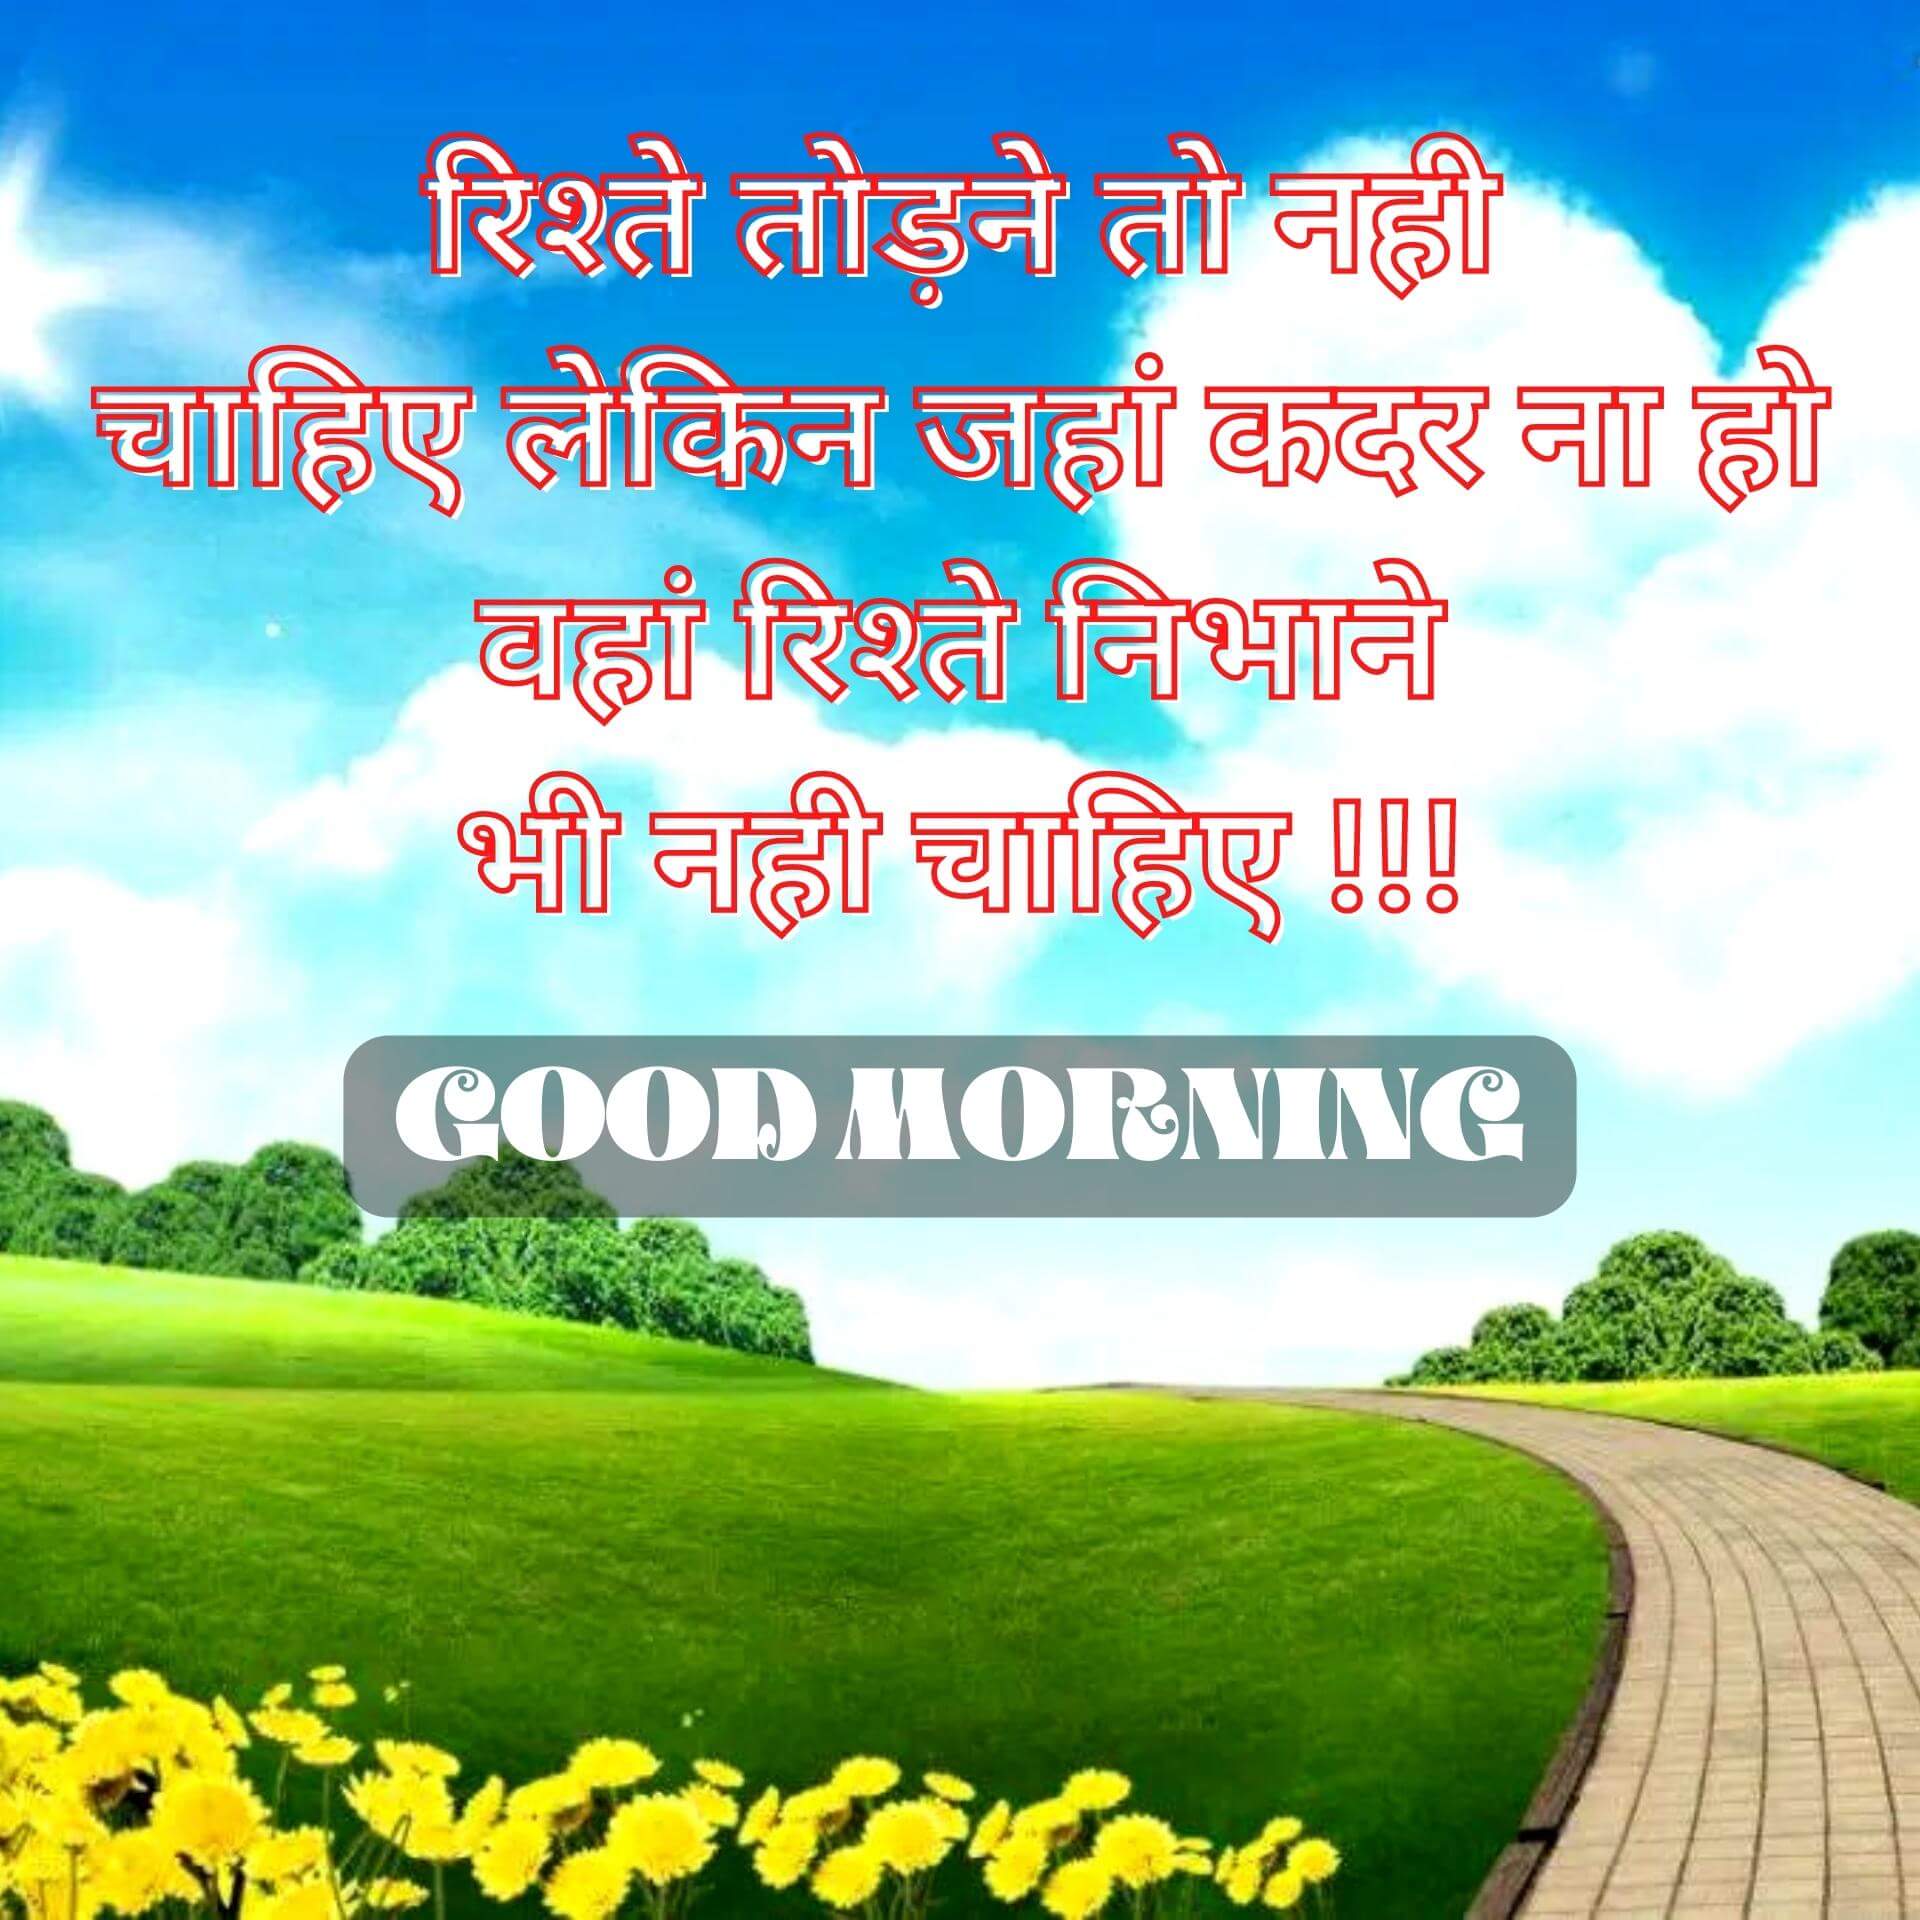 Best HD New Good Morning Images With Hindi Quotes Wallpaper Free Download